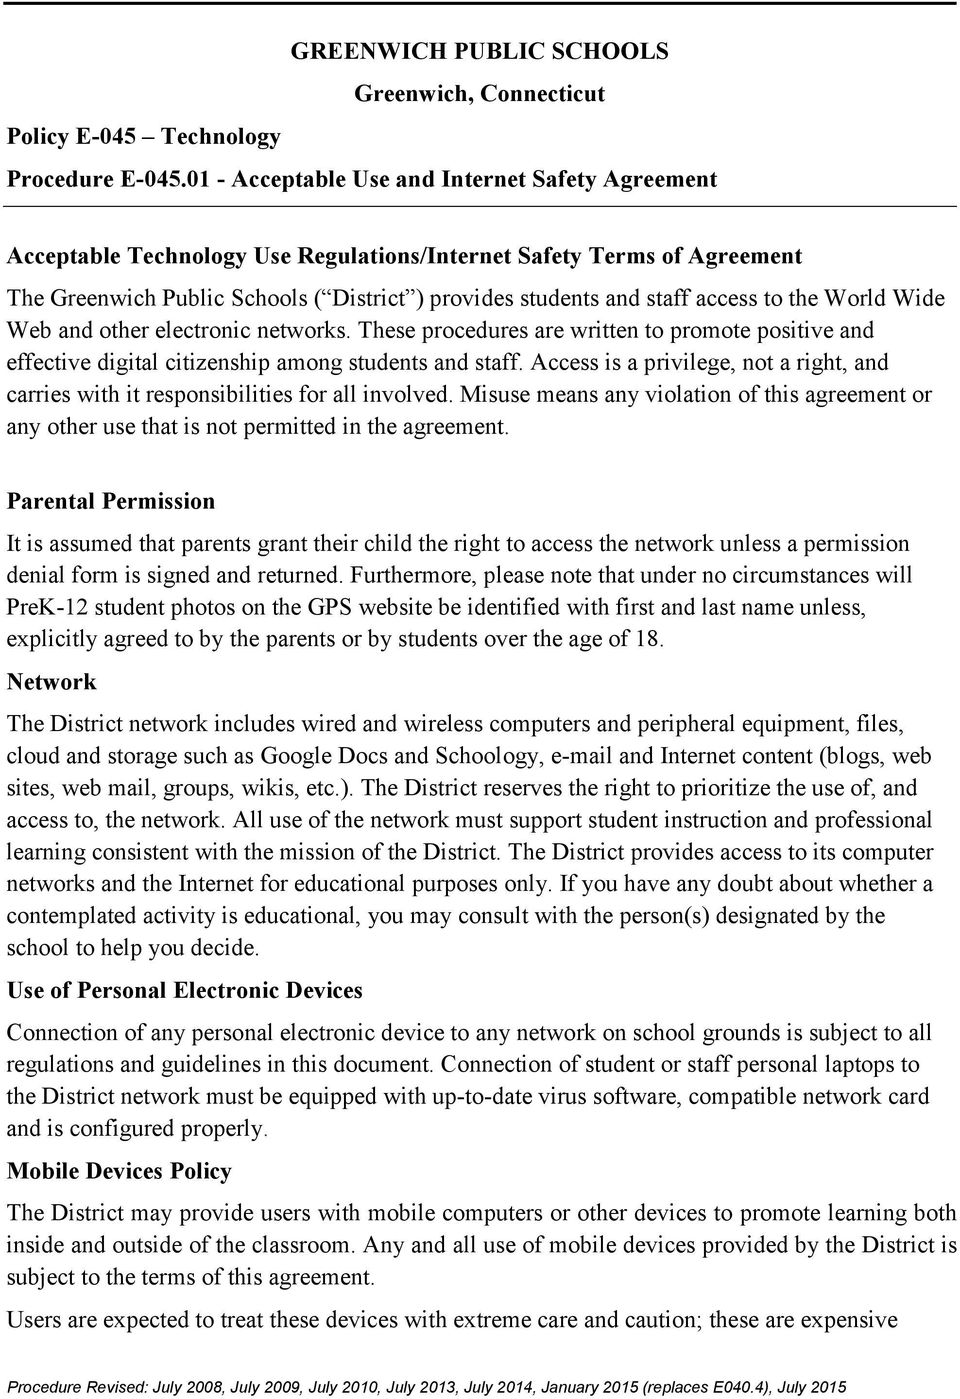 to the World Wide Web and other electronic networks. These procedures are written to promote positive and effective digital citizenship among students and staff.